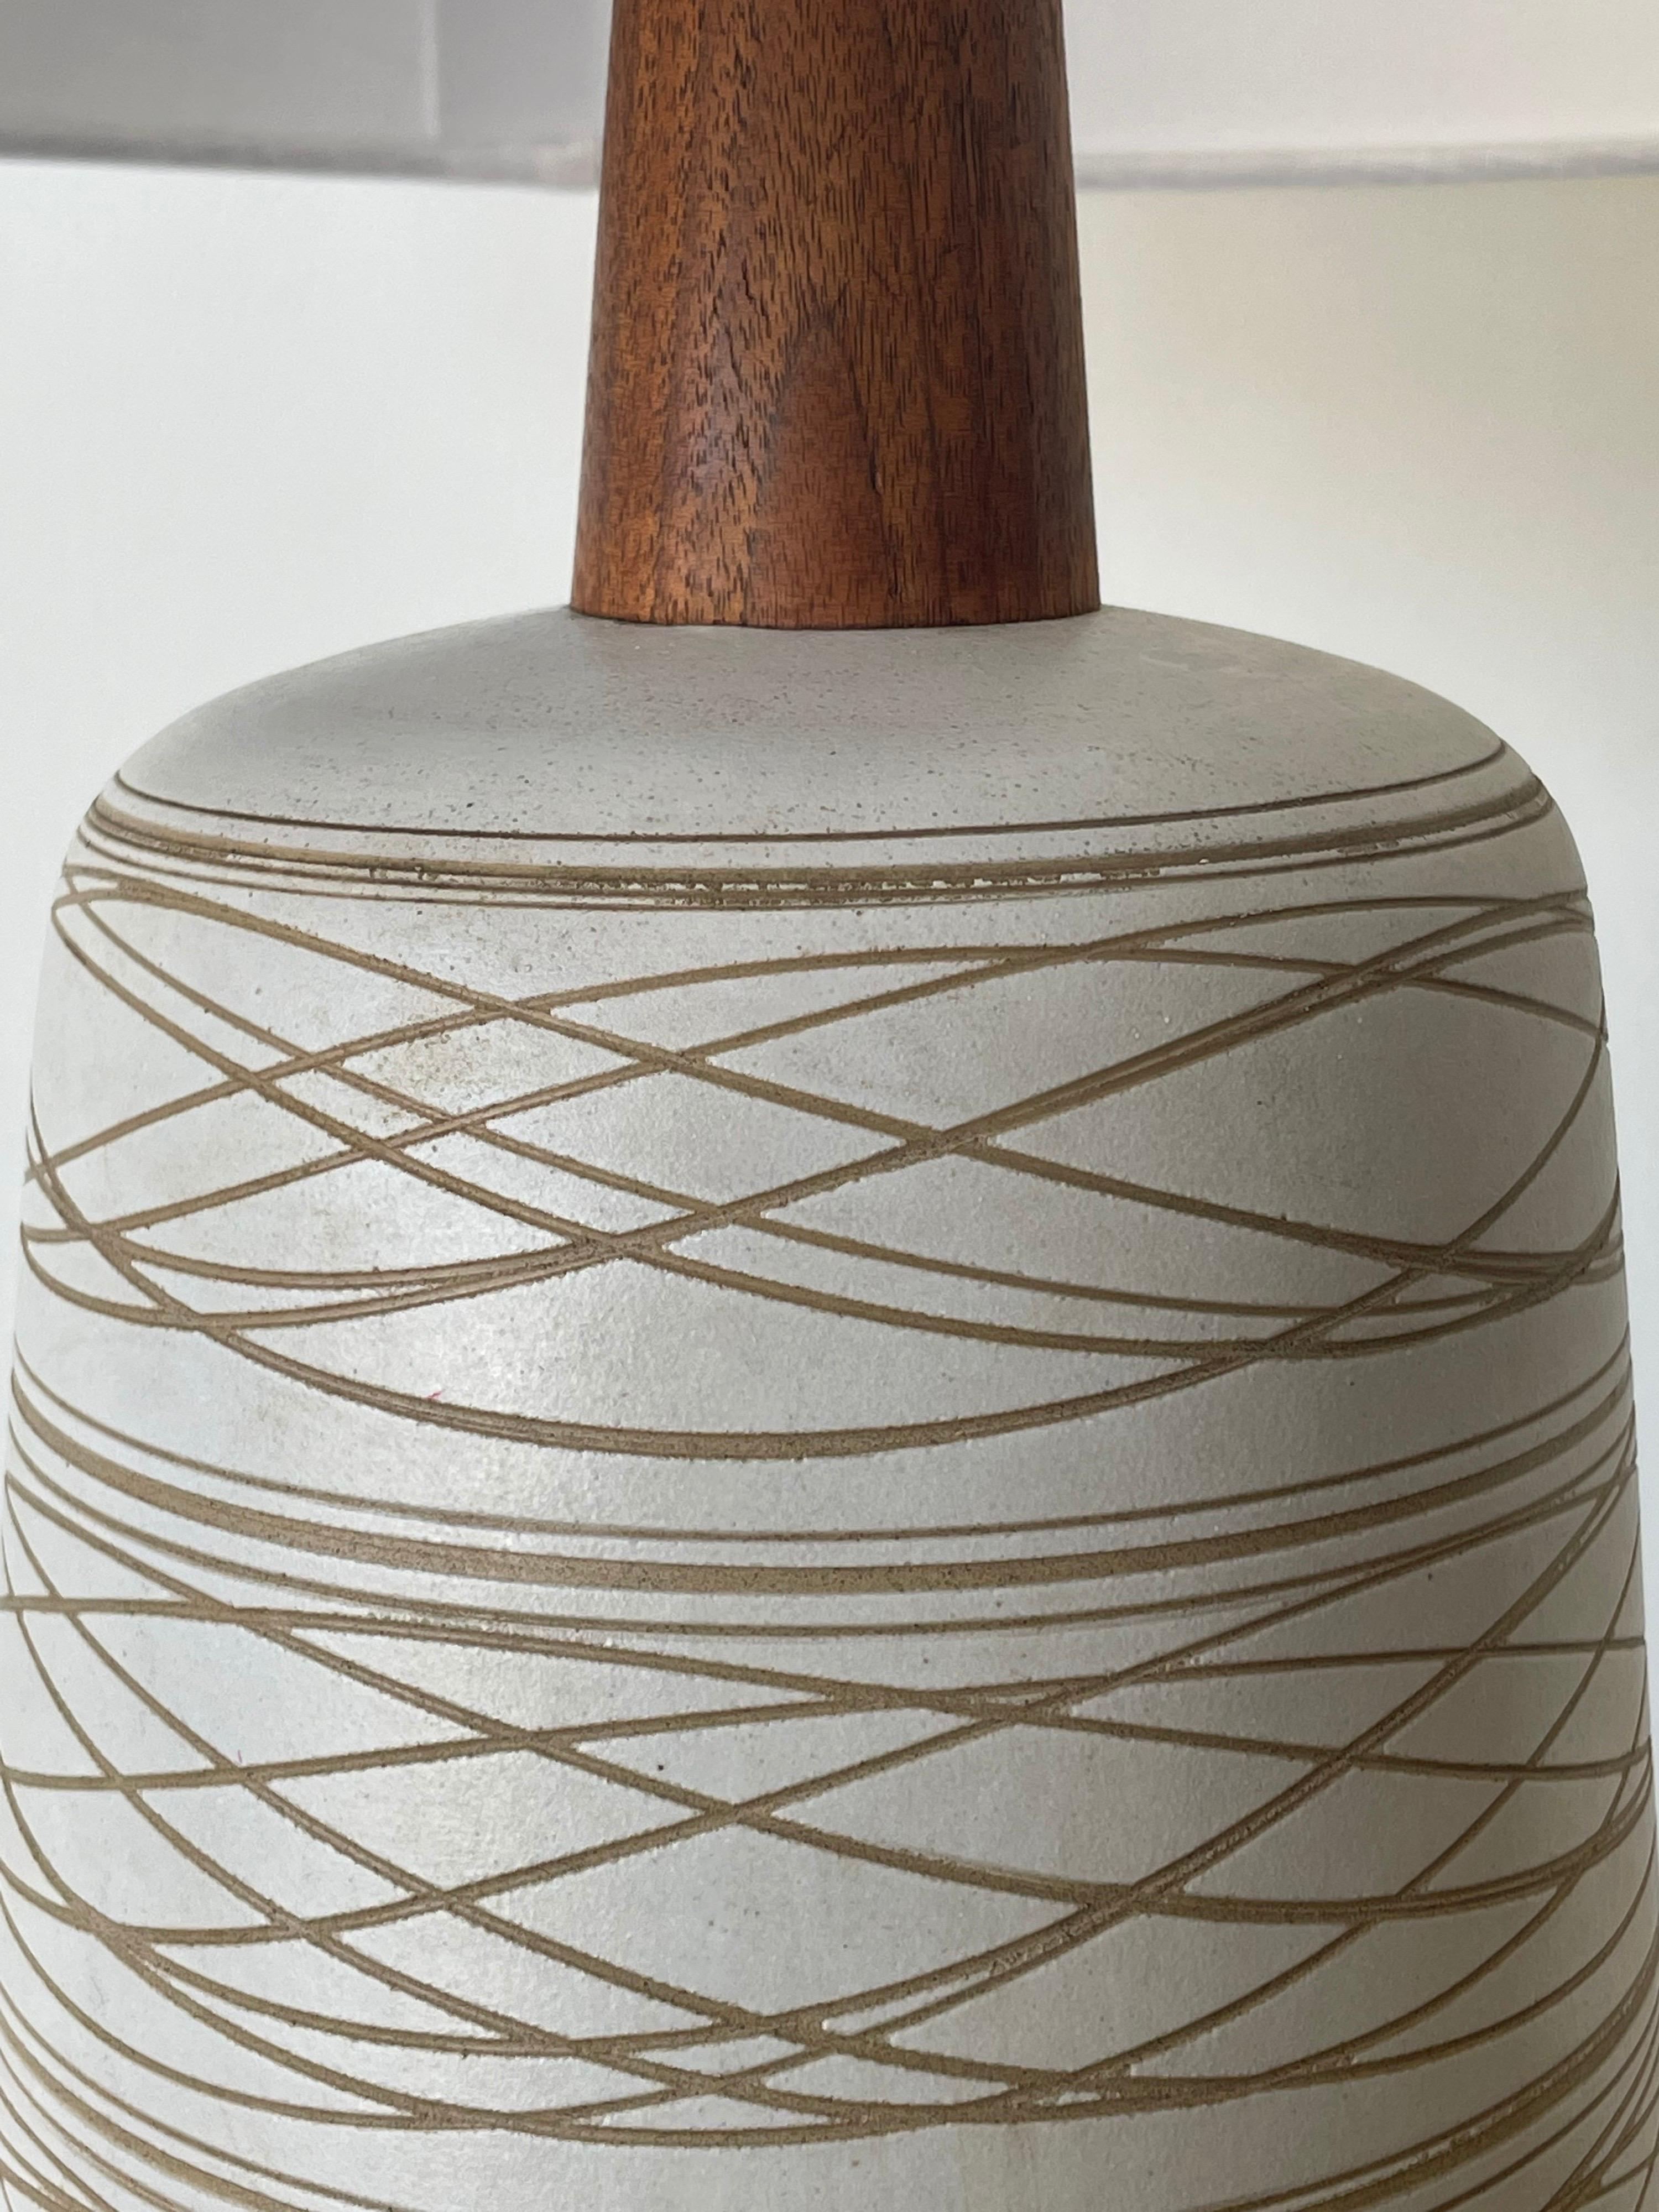 Large Martz lamp by ceramicist duo Jane and Gordon Martz for Marshall Studios. Features a white/ off white glaze with incised tan pattern. Walnut base, neck, and finial.

Overall;
32” talll
17” wide 

Base
7” wide
17.5” tall.